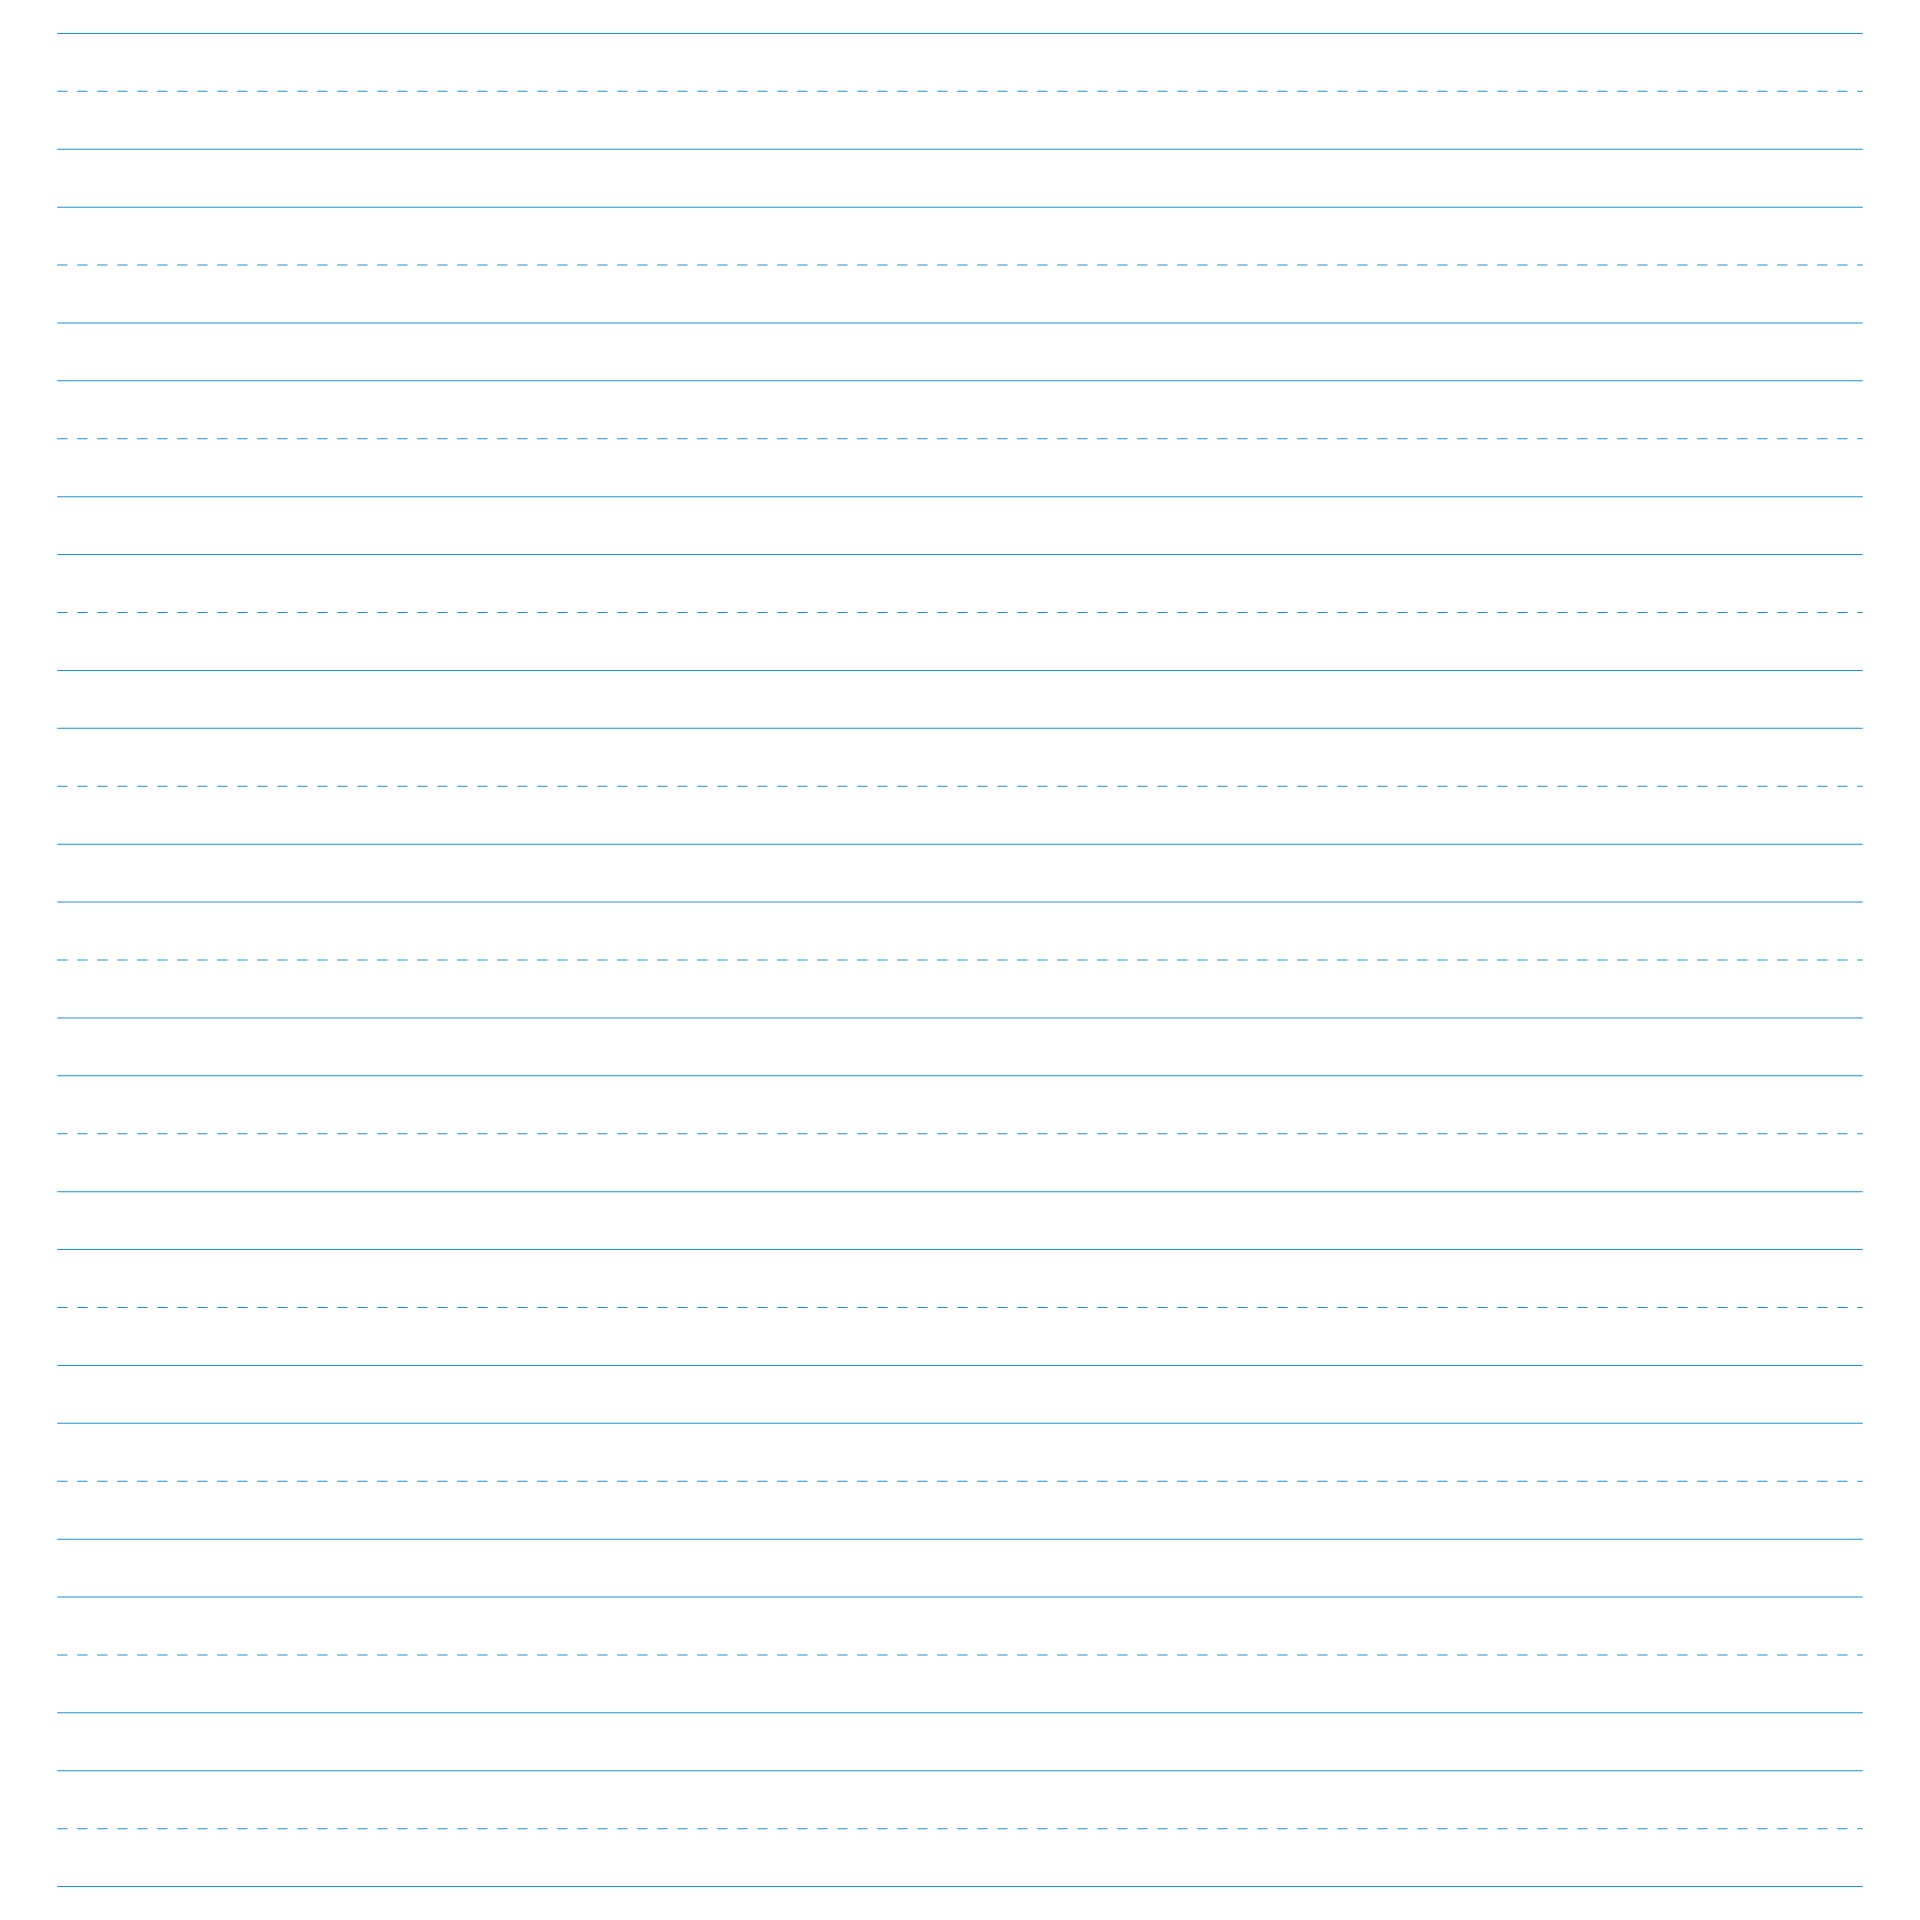 5 Best Images of Printable Blank Writing Pages - Free ...